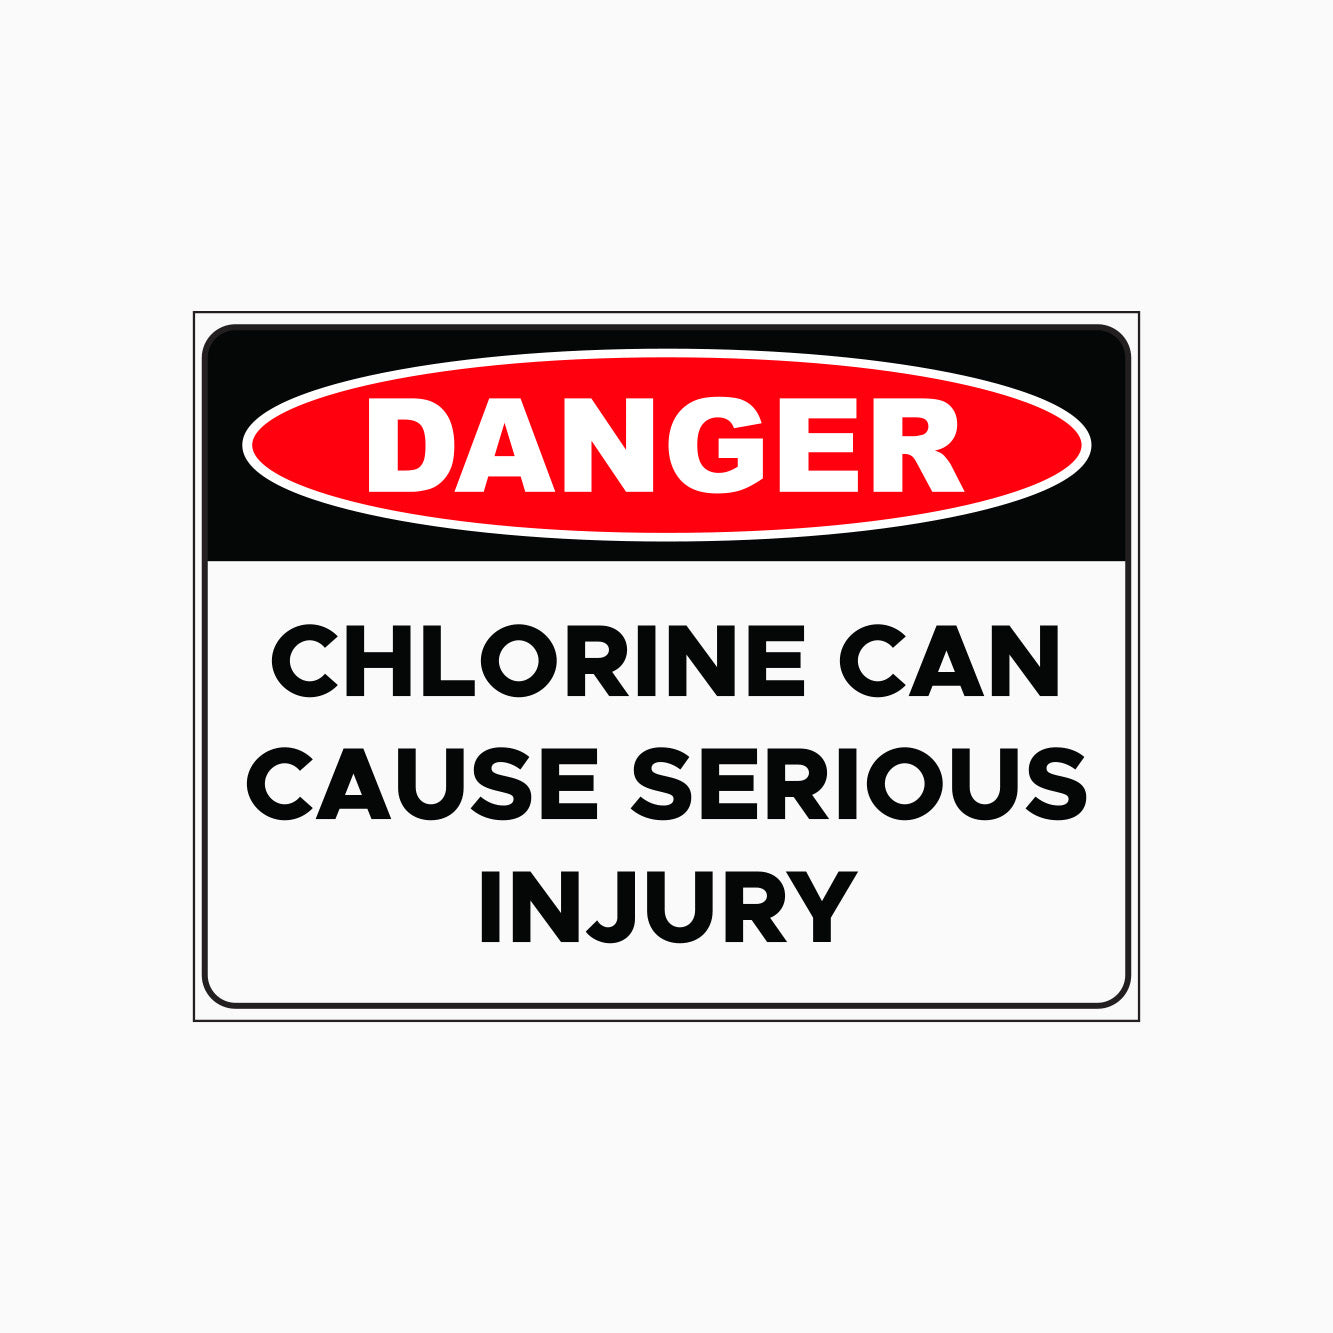 CHLORINE CAN CAUSE SERIOUS INJURY SIGN - DANGER SIGN